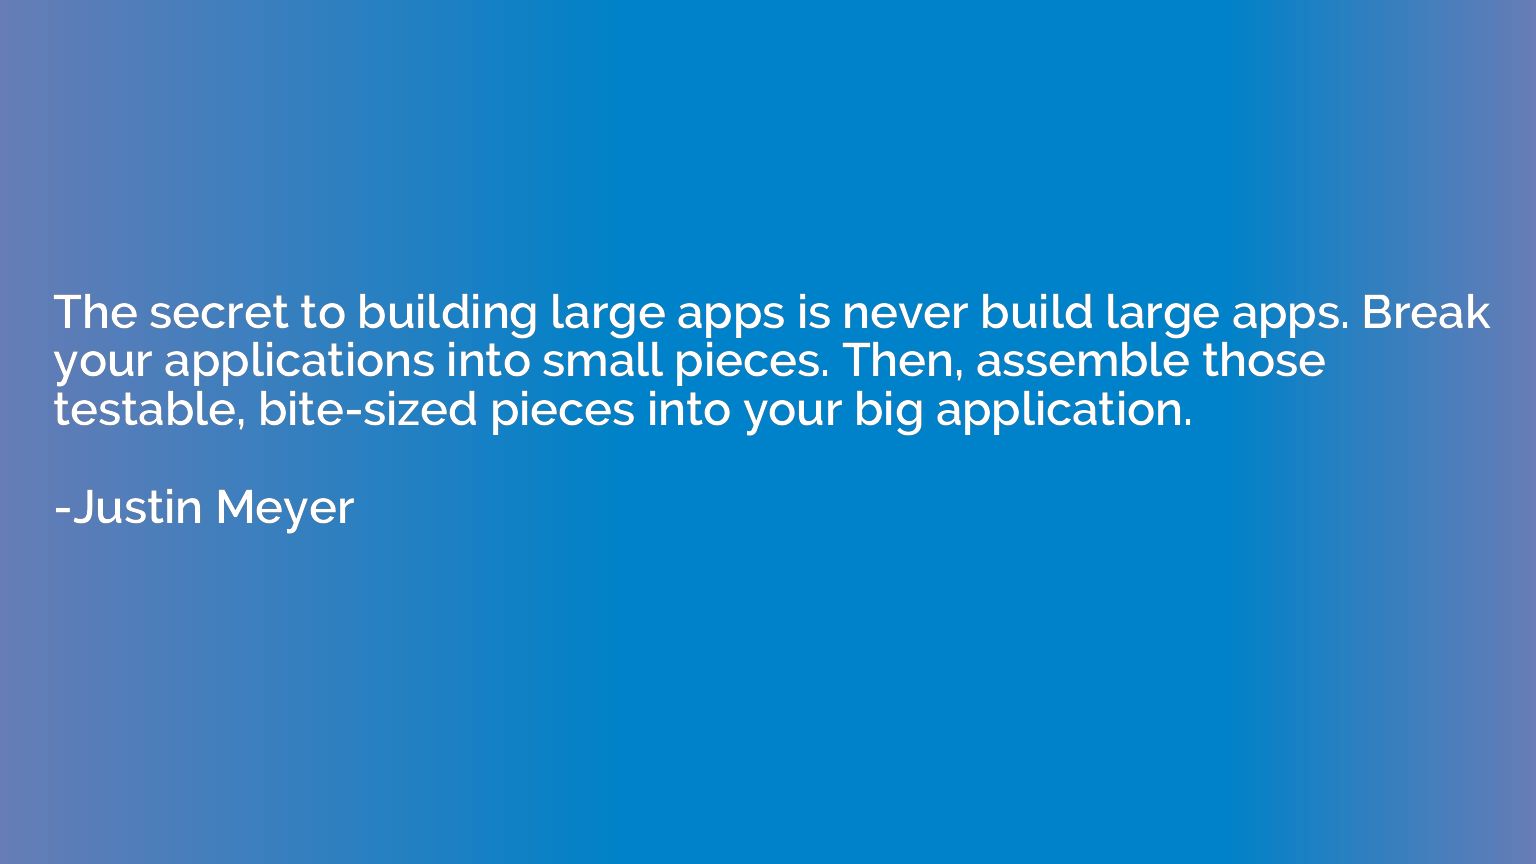 The secret to building large apps is never build large apps.